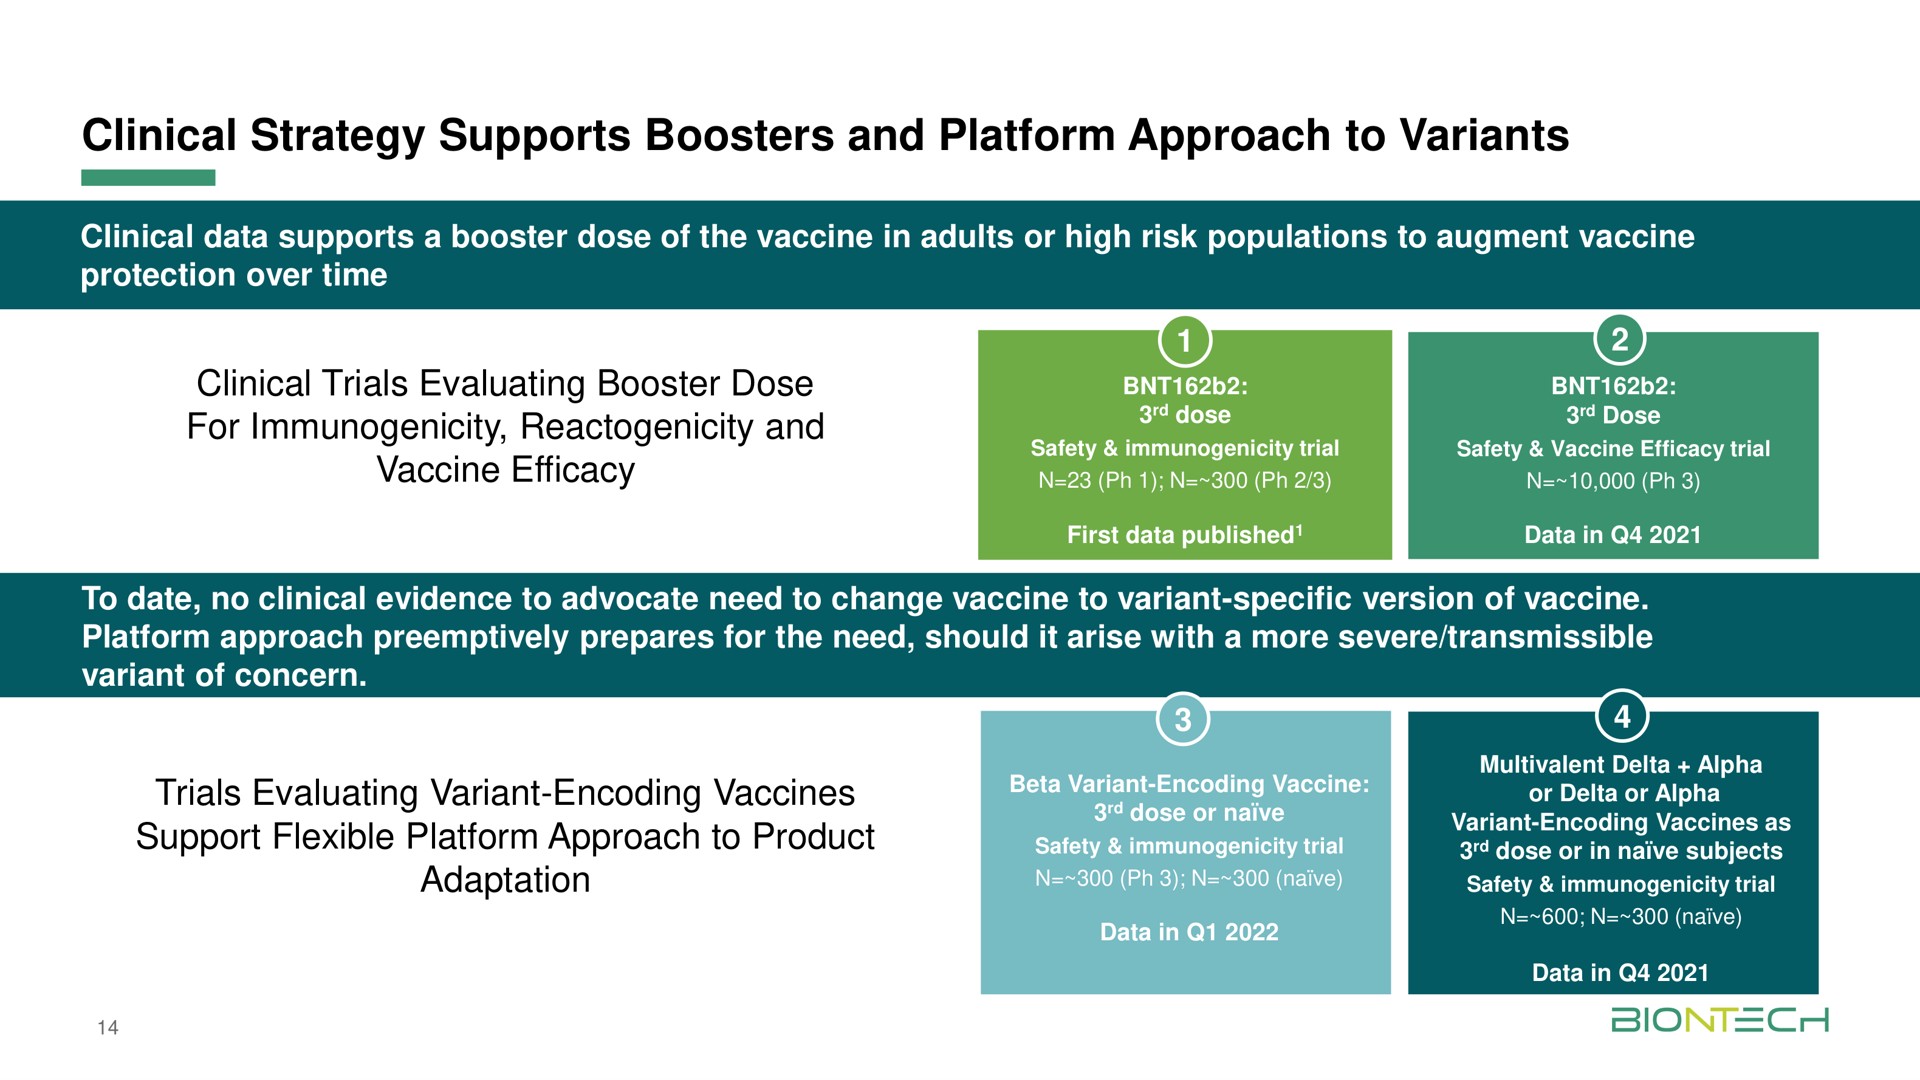 clinical strategy supports boosters and platform approach to variants clinical trials evaluating booster dose for immunogenicity and vaccine efficacy trials evaluating variant encoding vaccines support flexible platform approach to product adaptation | BioNTech